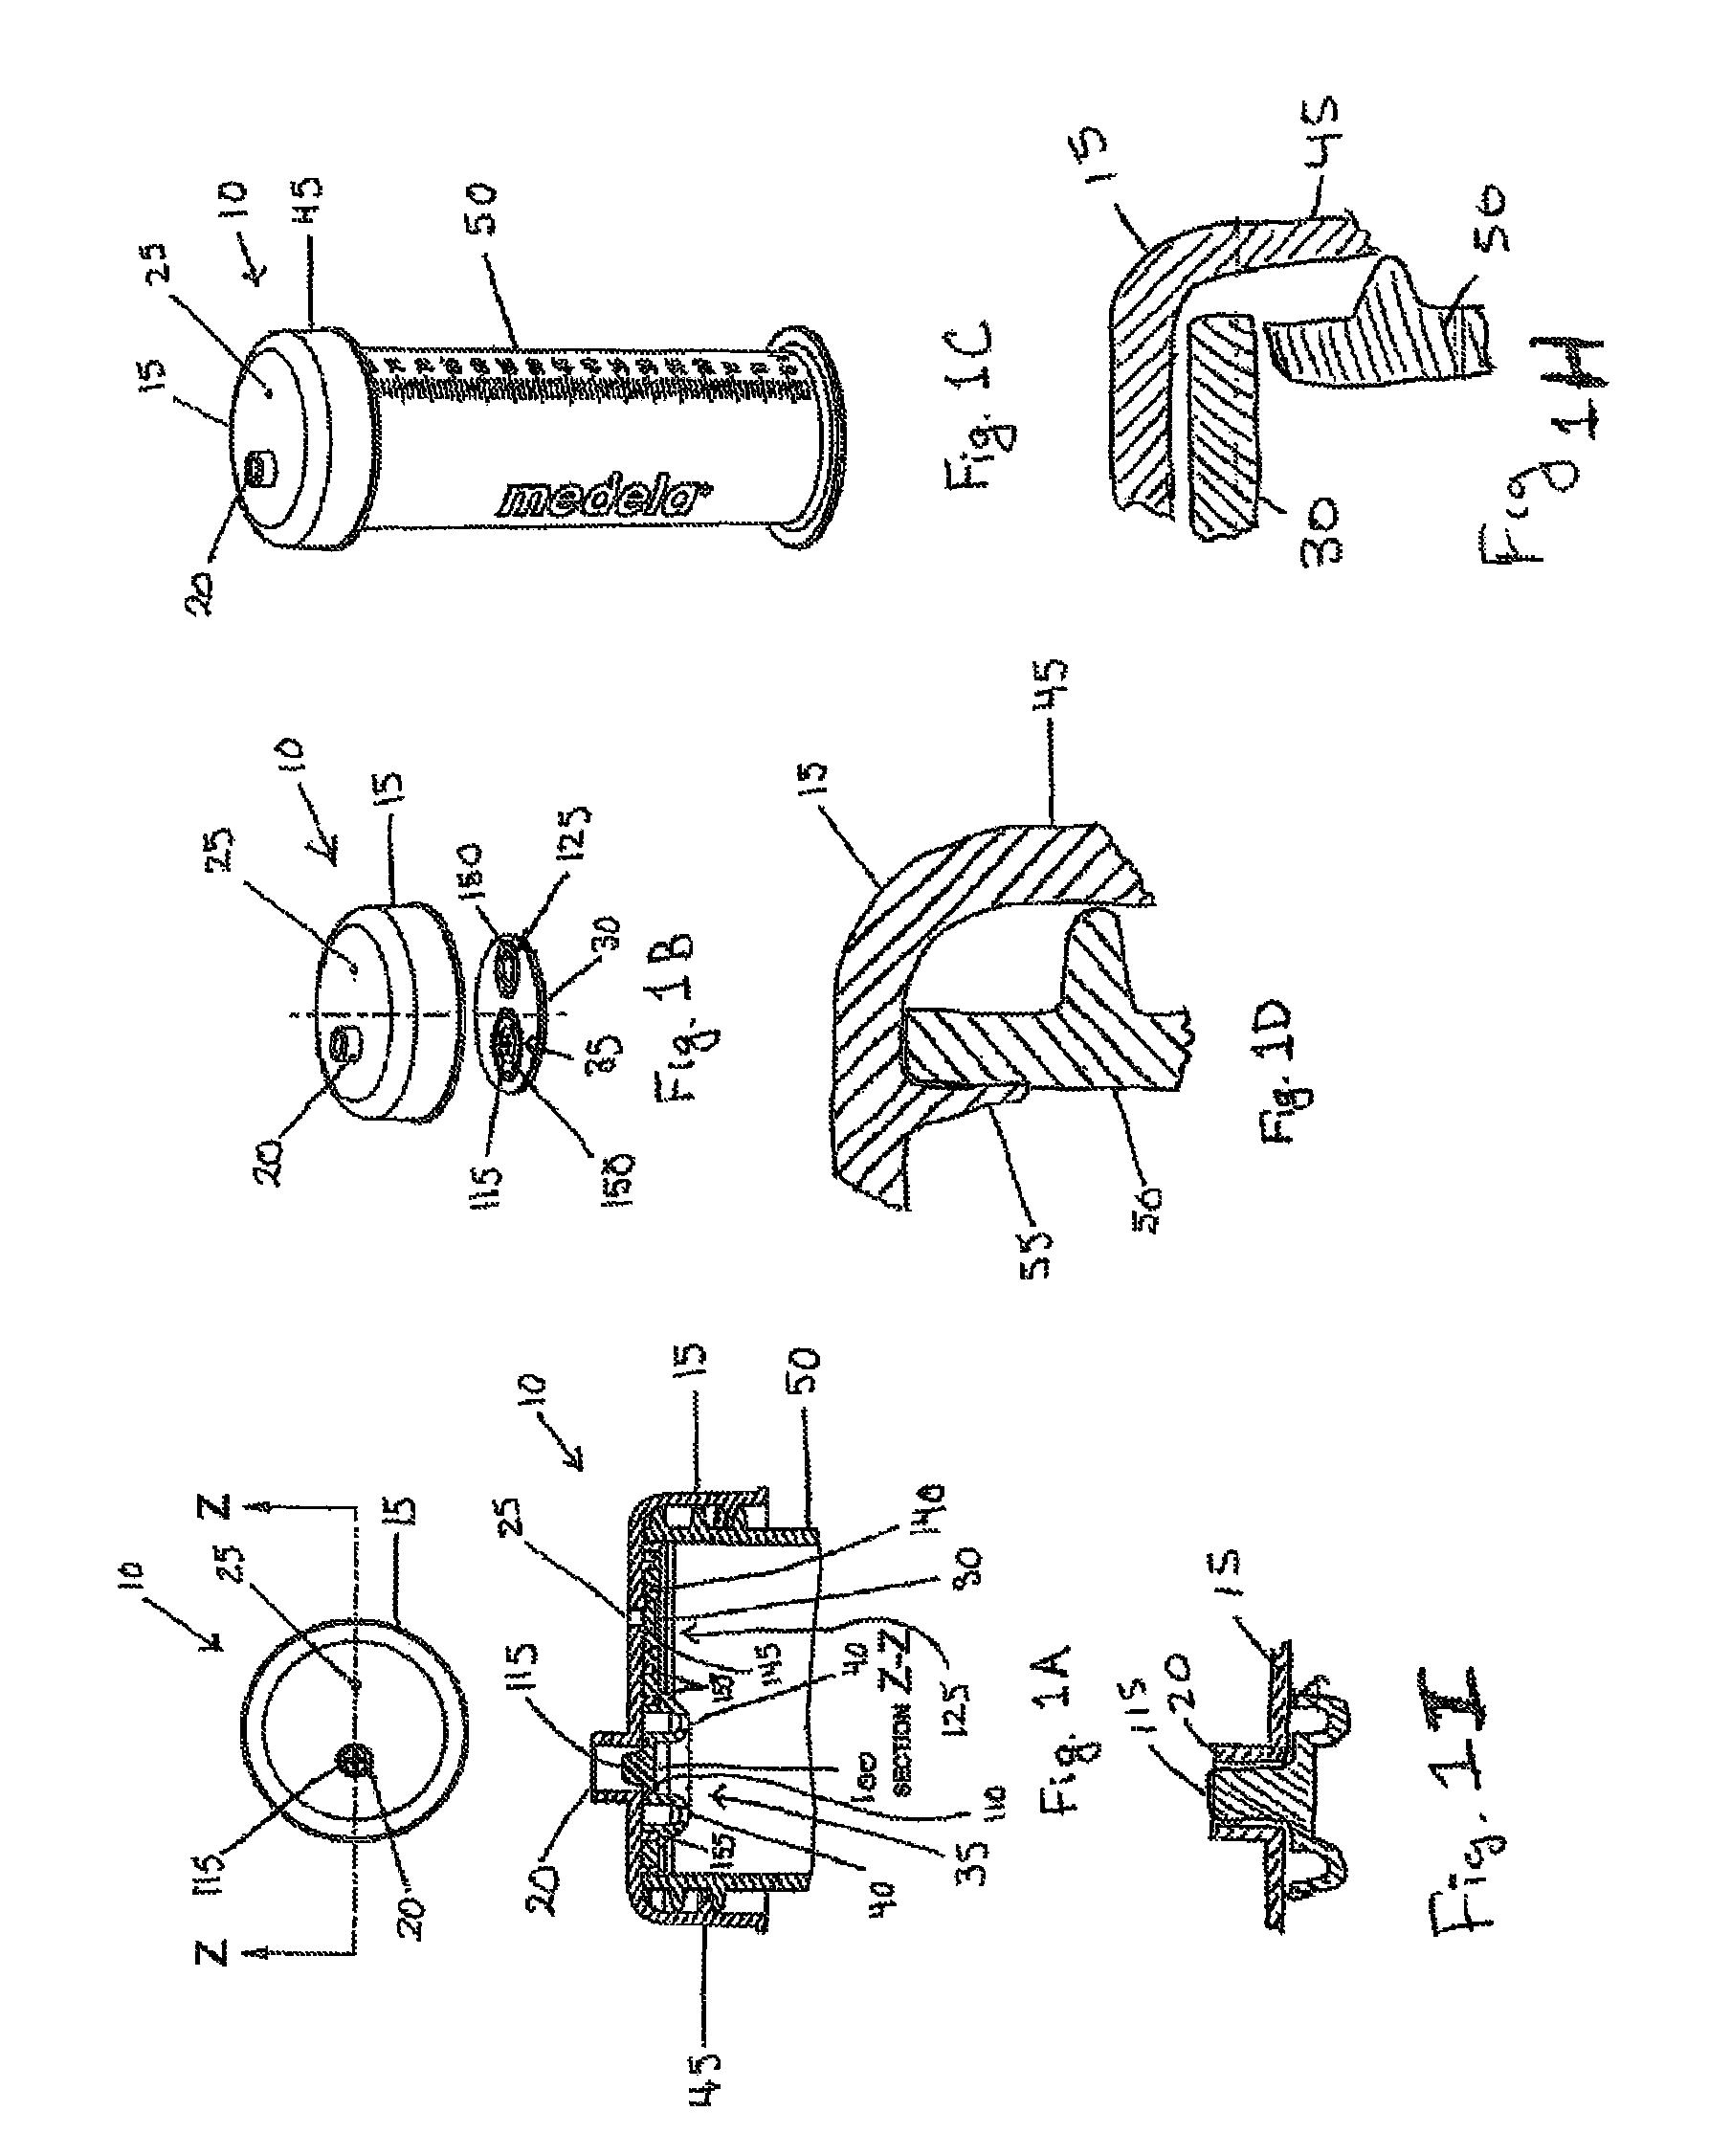 Container with sealed cap and venting system